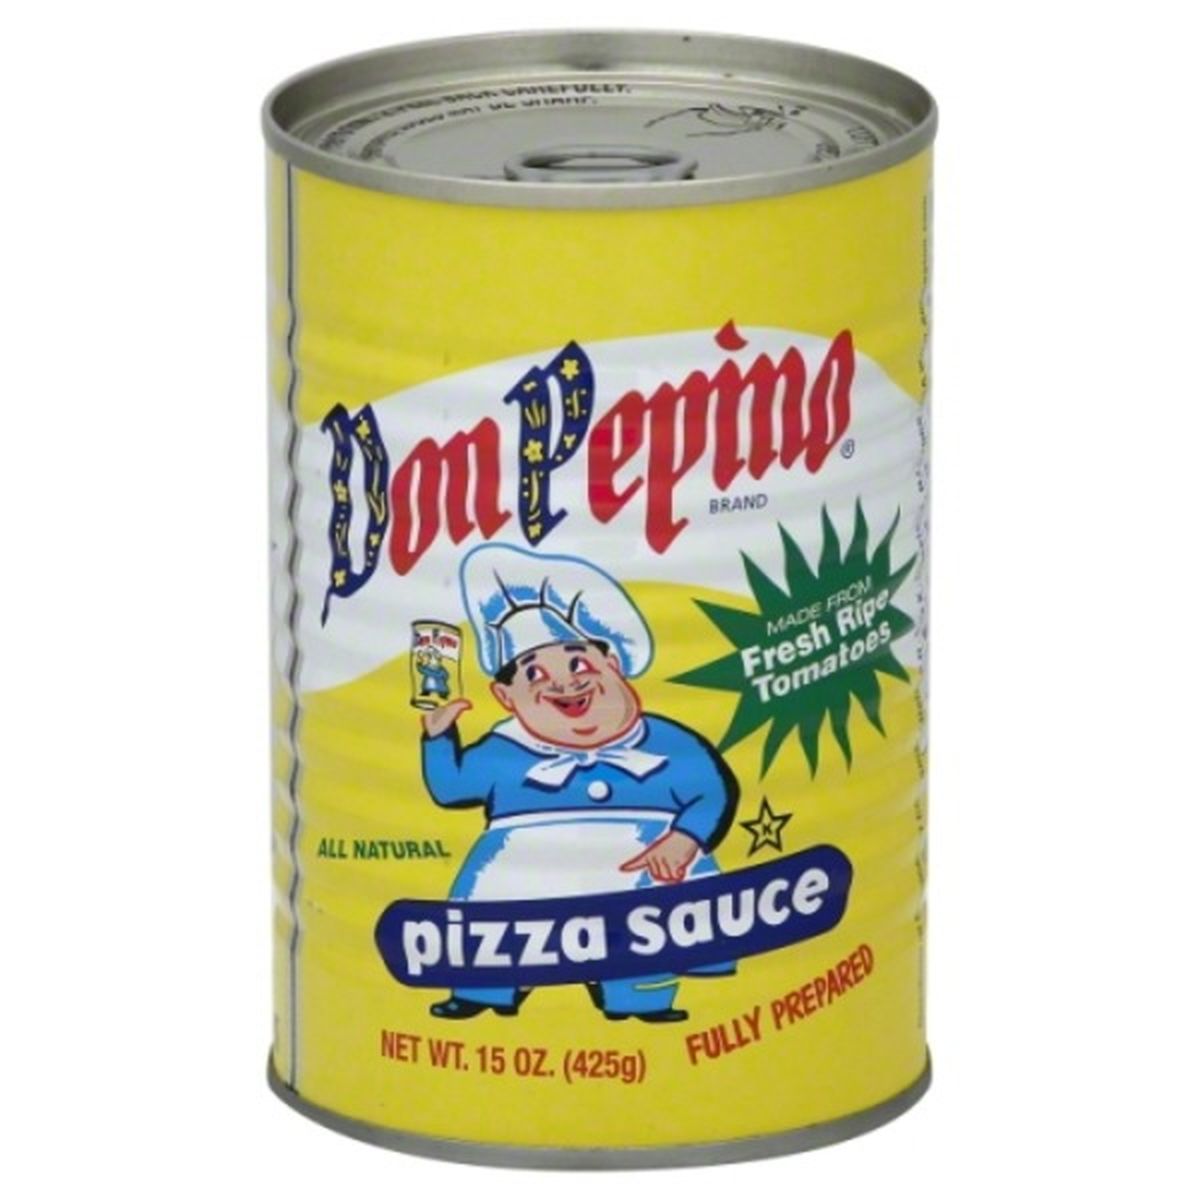 Calories in Don Pepino Pizza Sauce, Gluten Free, Tomatoes